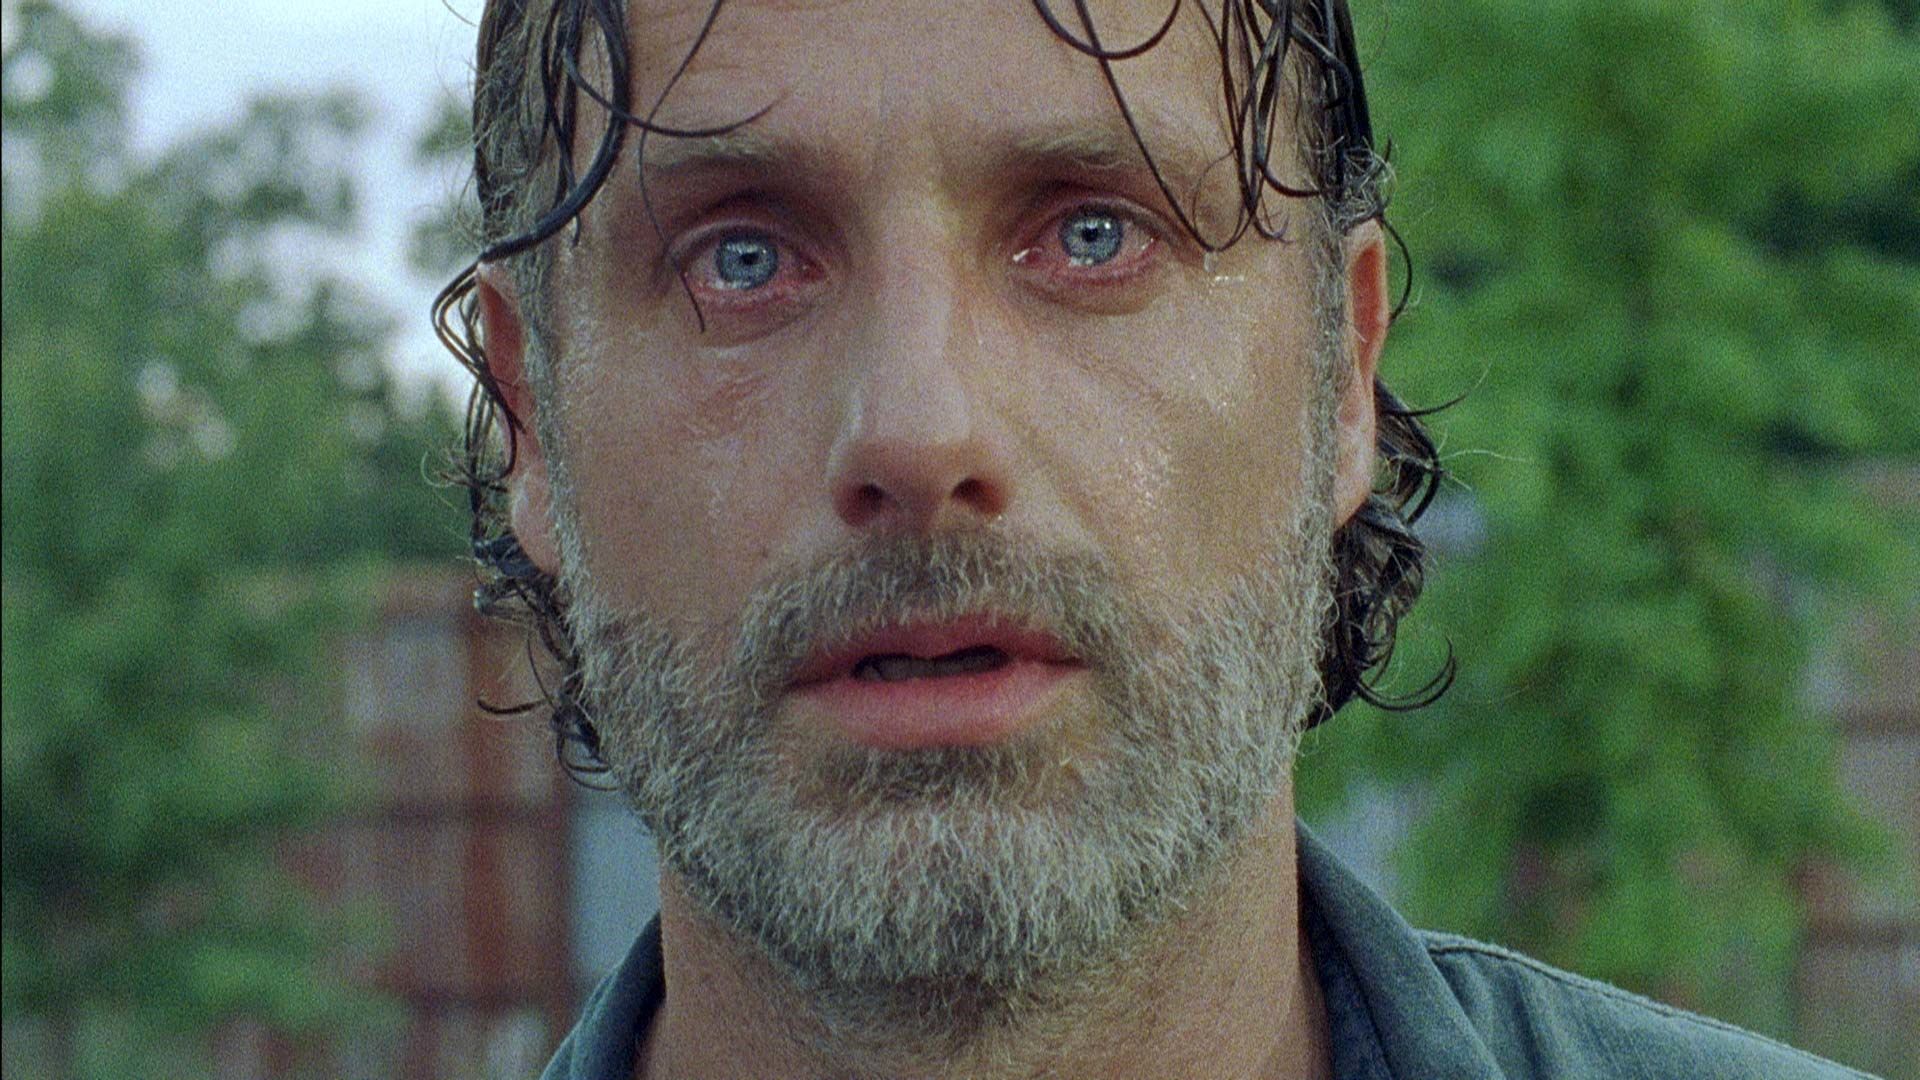 ‘Walking Dead’ Star Andrew Lincoln Is Reportedly Exiting The Show / Being Eaten